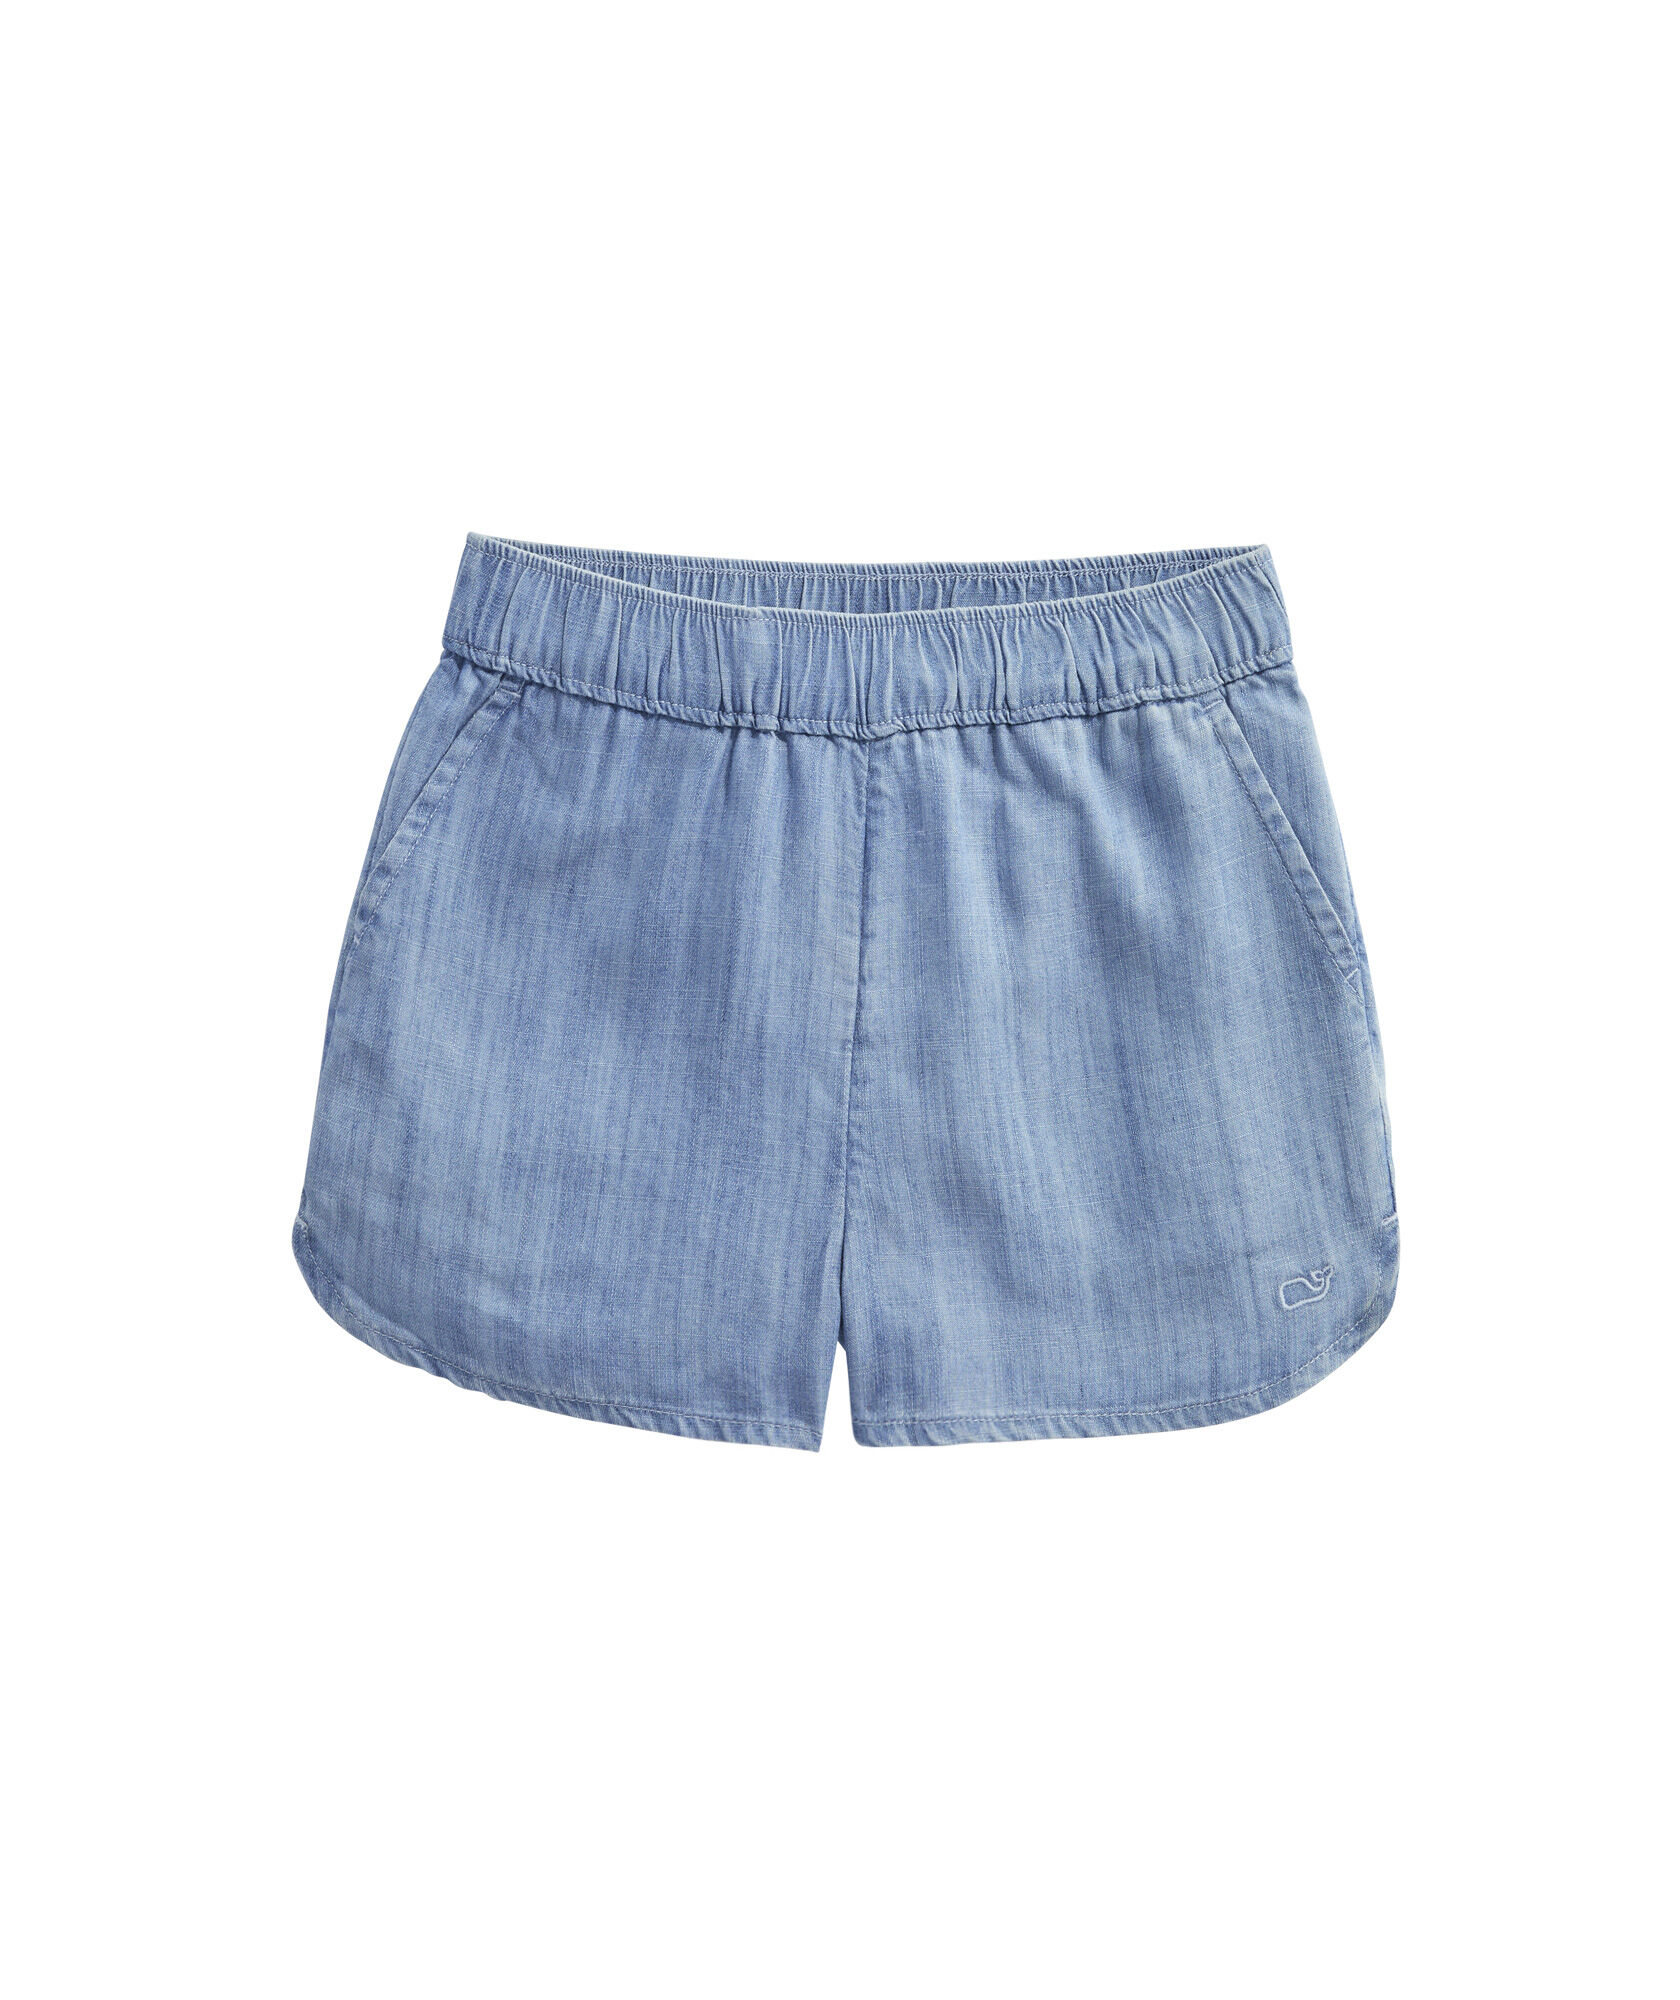 OUTLET Girls' Chambray Pull-On Shorts